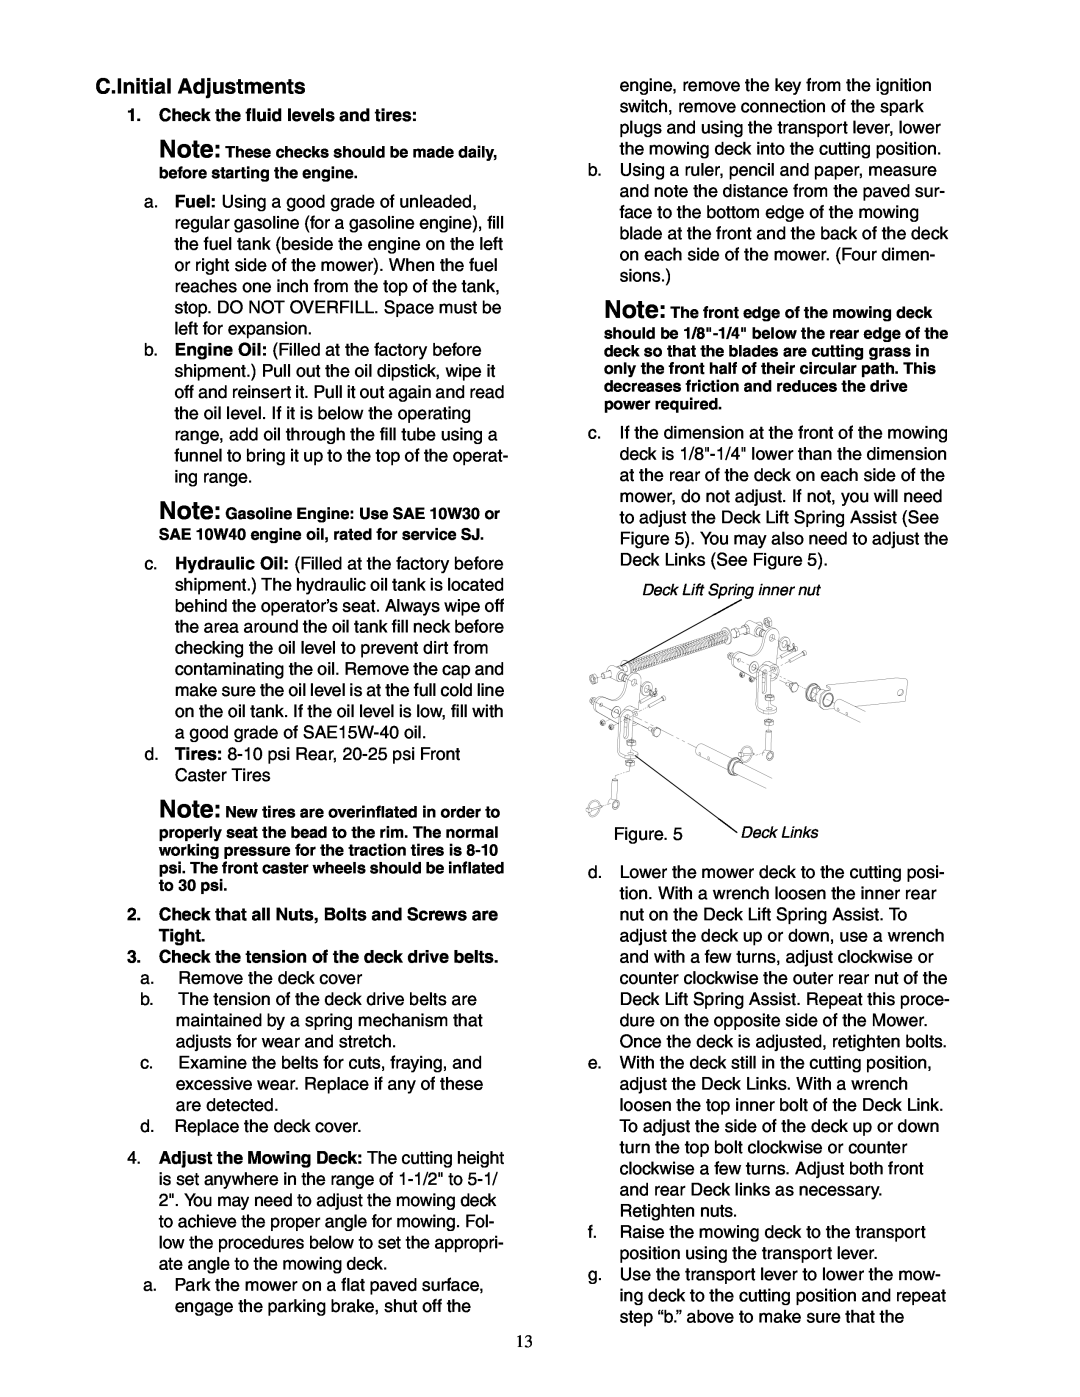 Cub Cadet 23HP Z-Force 60 service manual C.Initial Adjustments, Check the fluid levels and tires 